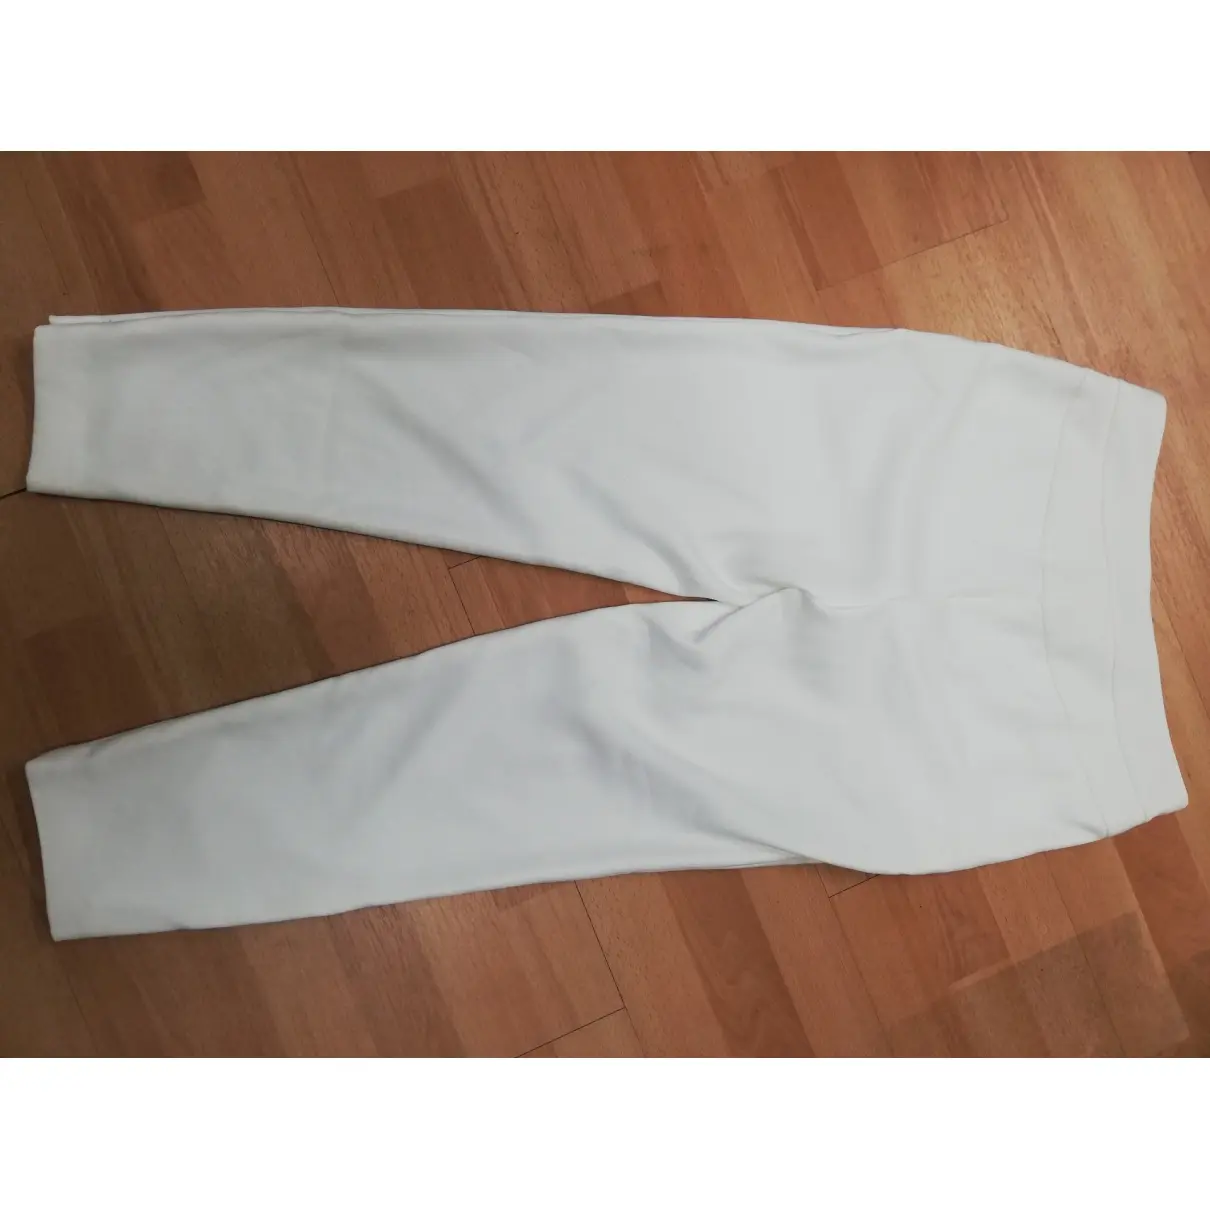 Yigal Azrouel Slim pants for sale